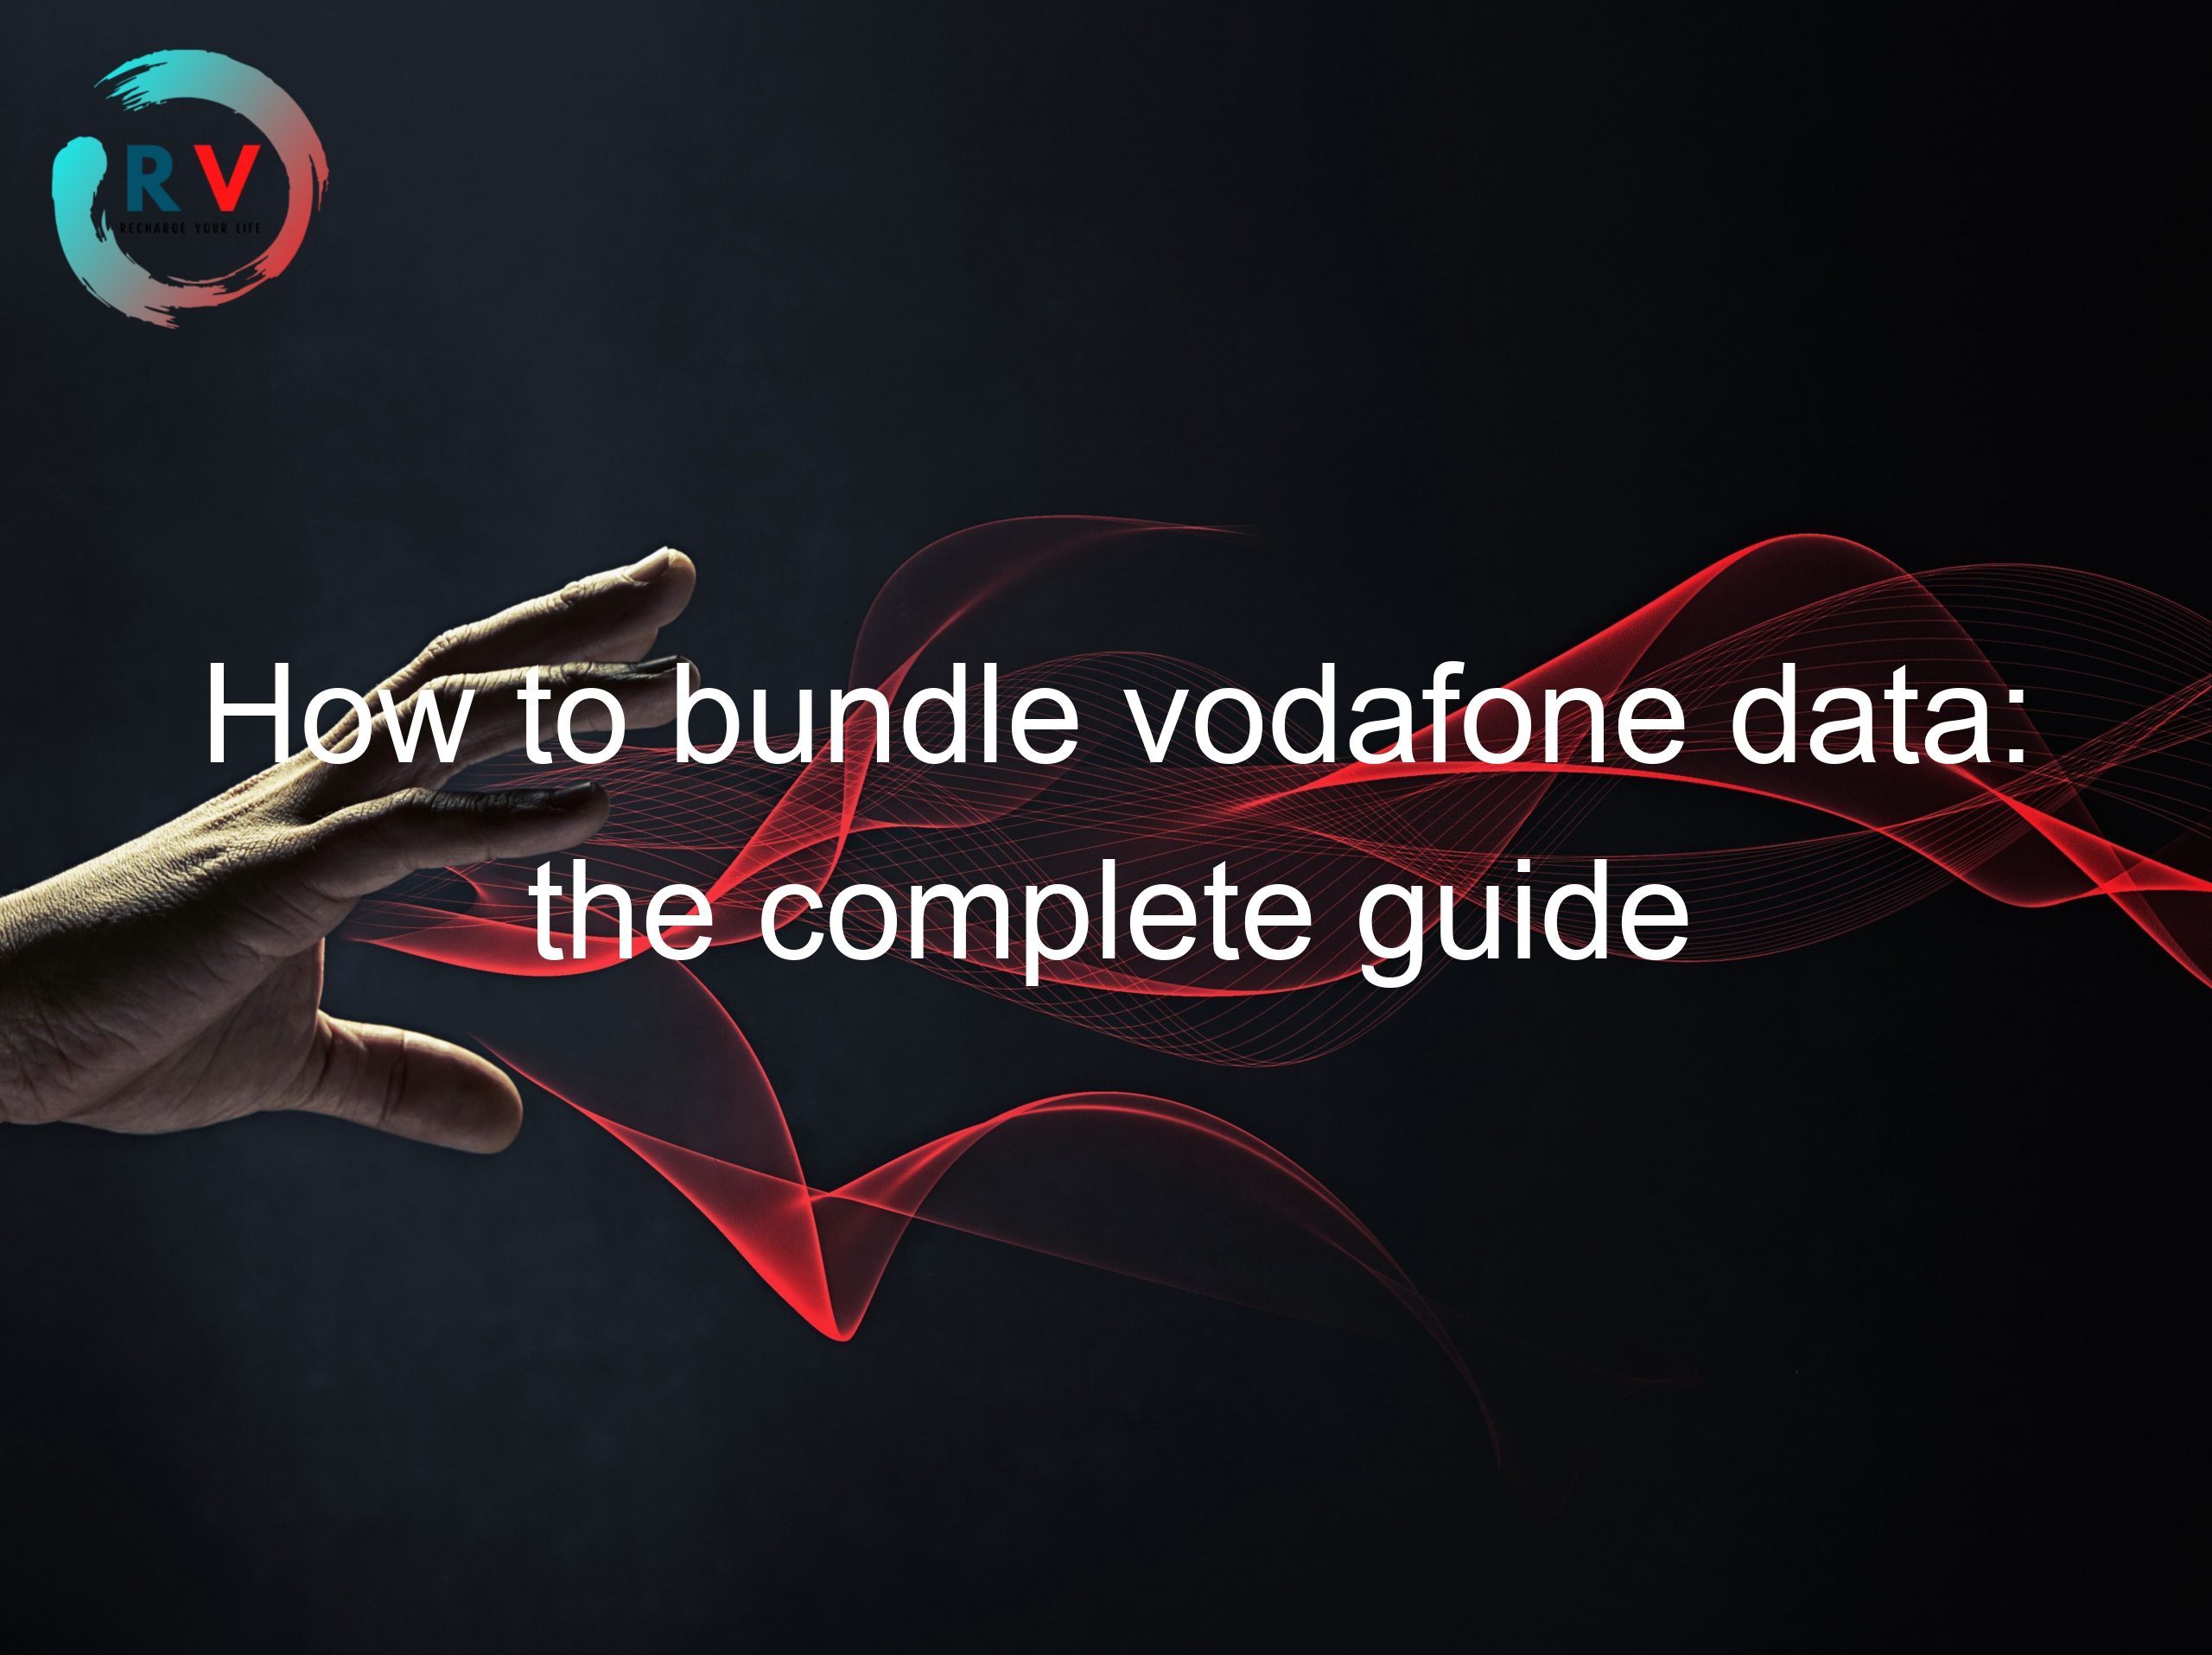 How to bundle vodafone data: the complete guide